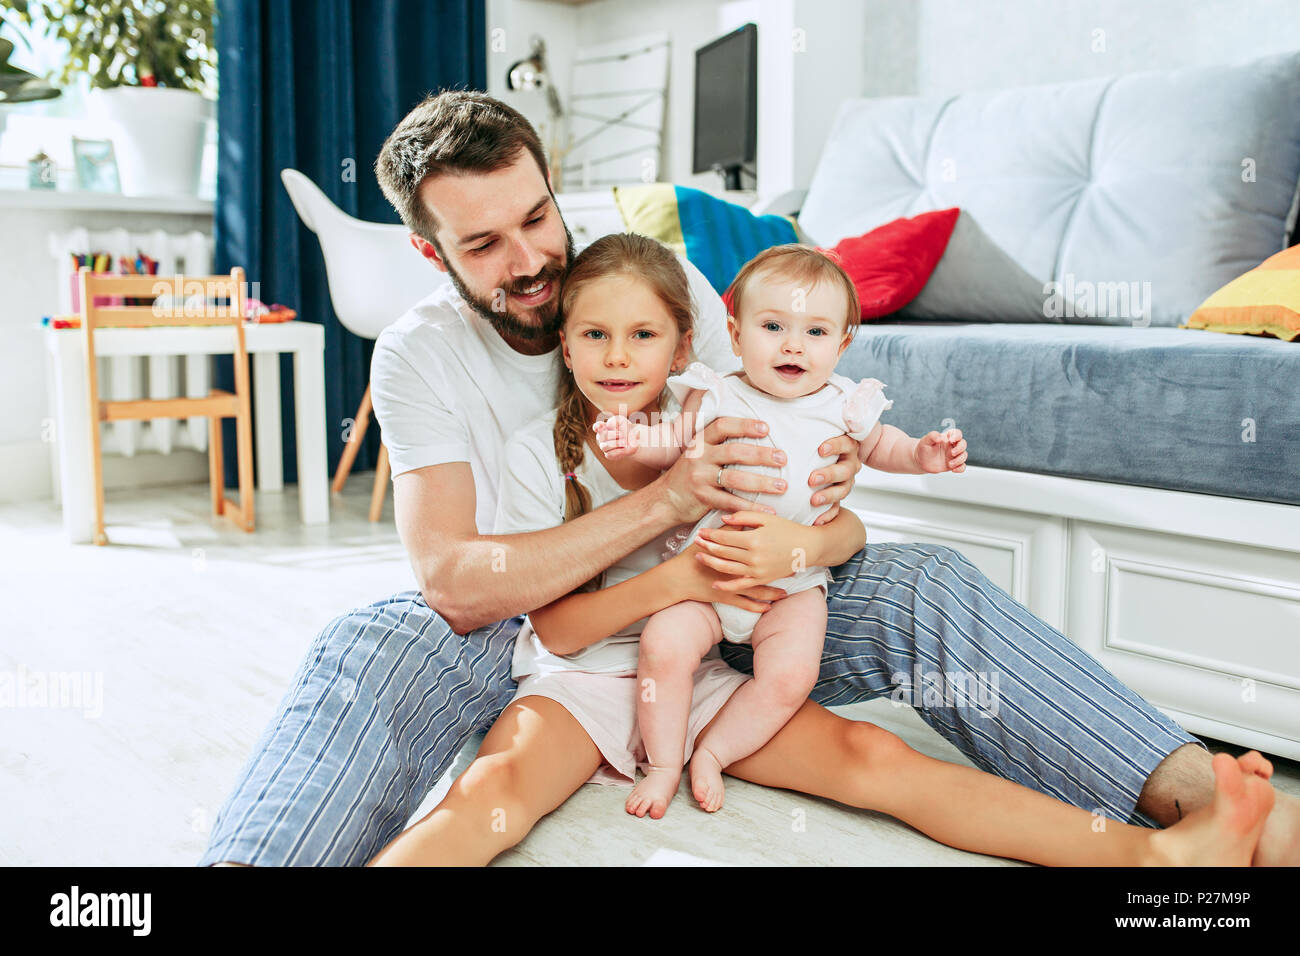 Baby with fathers long legs Stock Photo - Alamy